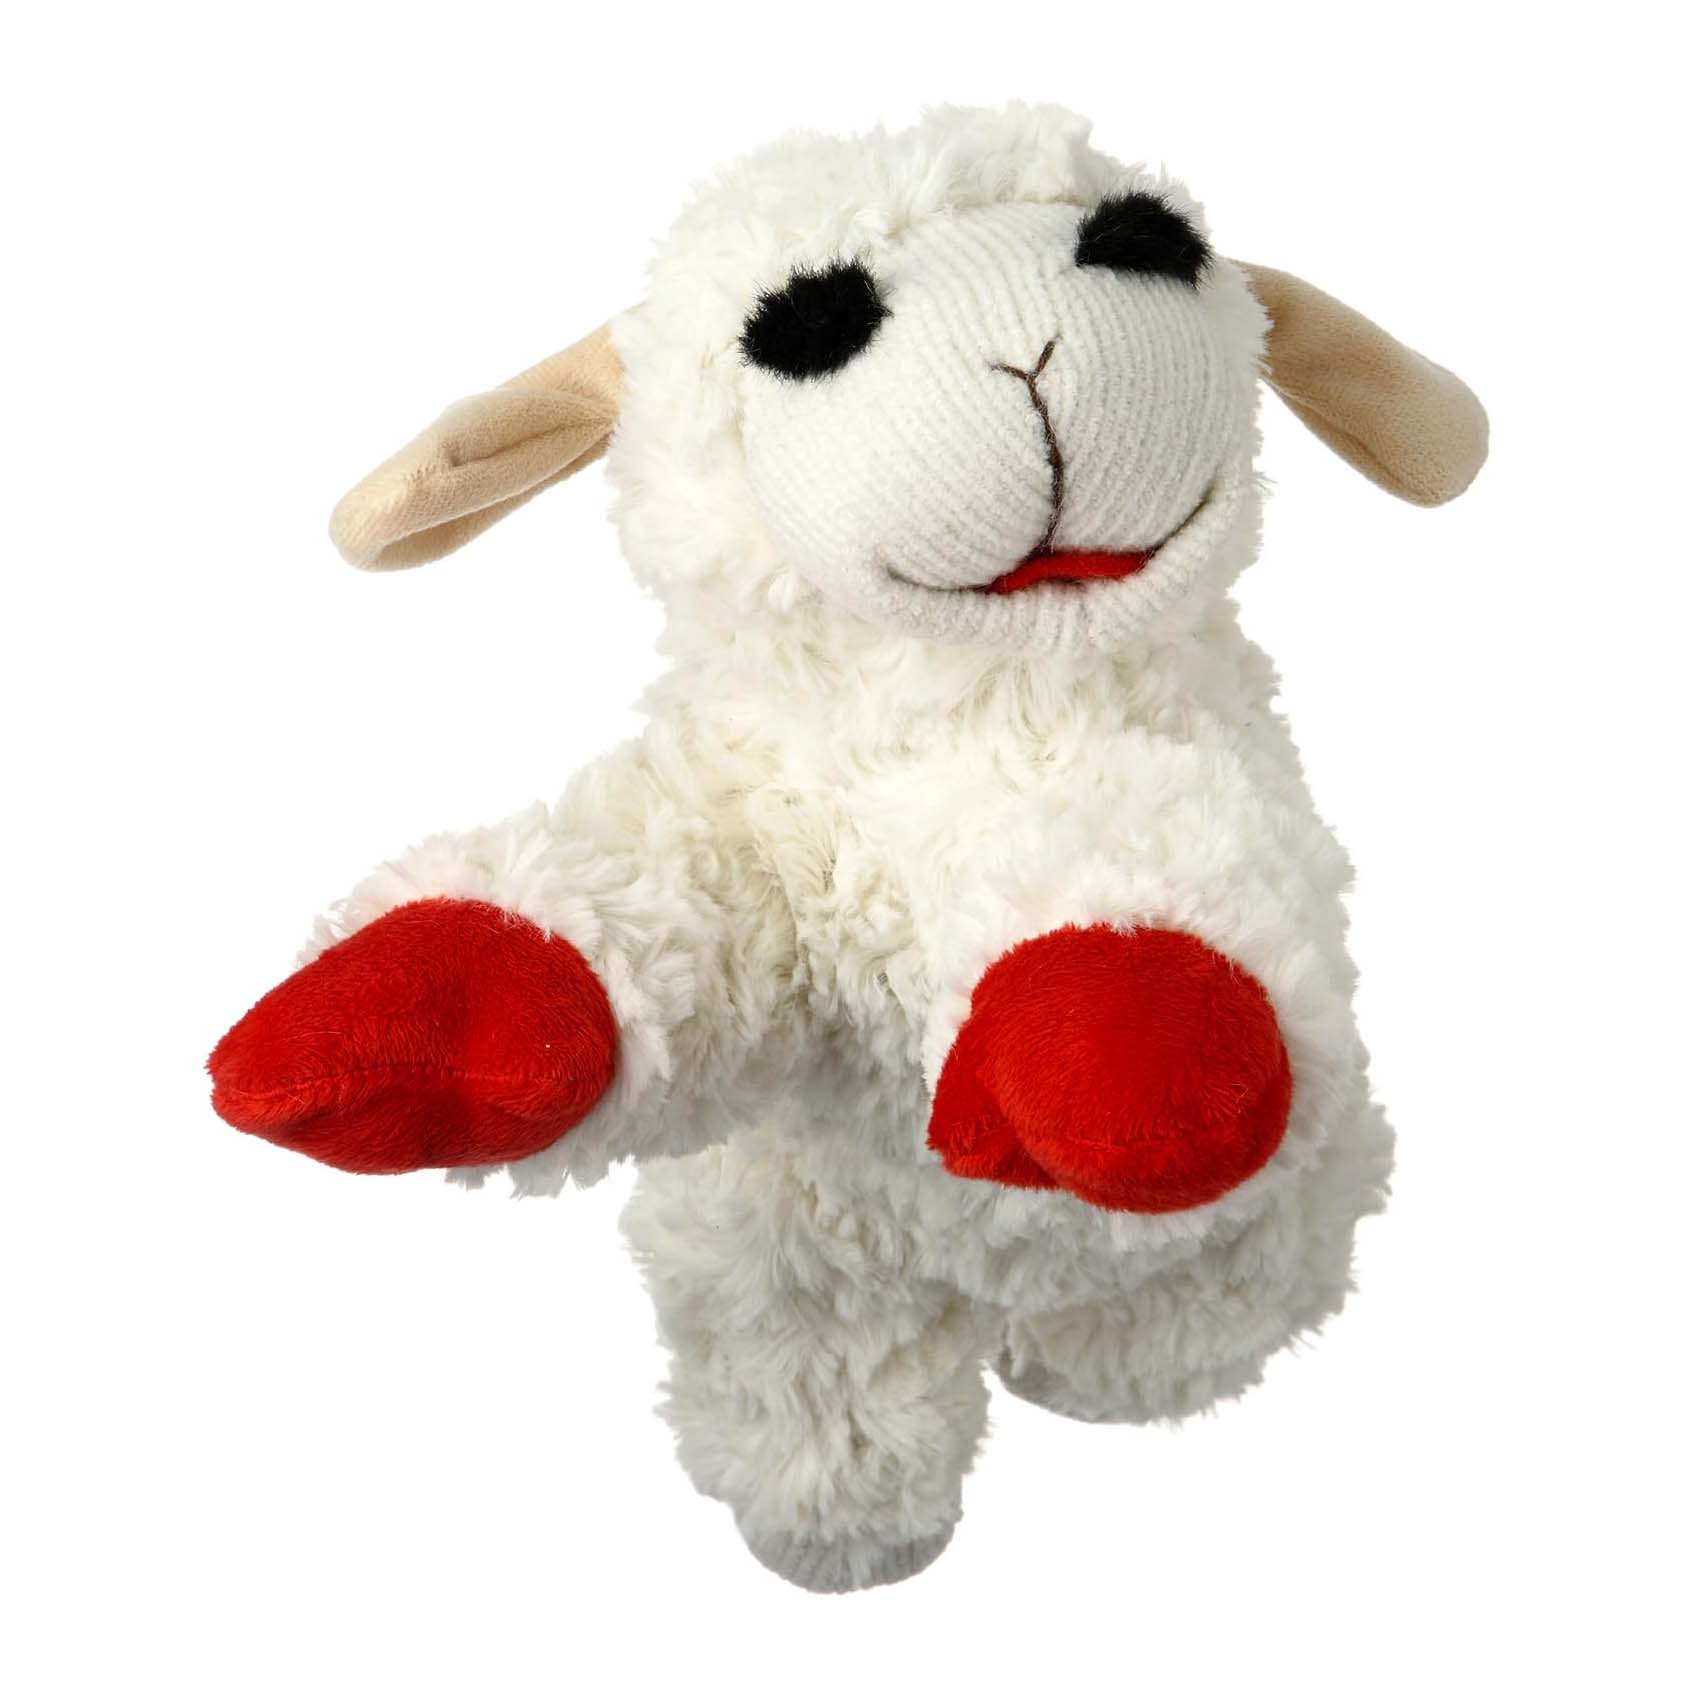 Multipet Plush Dog Toy in white with red hands 